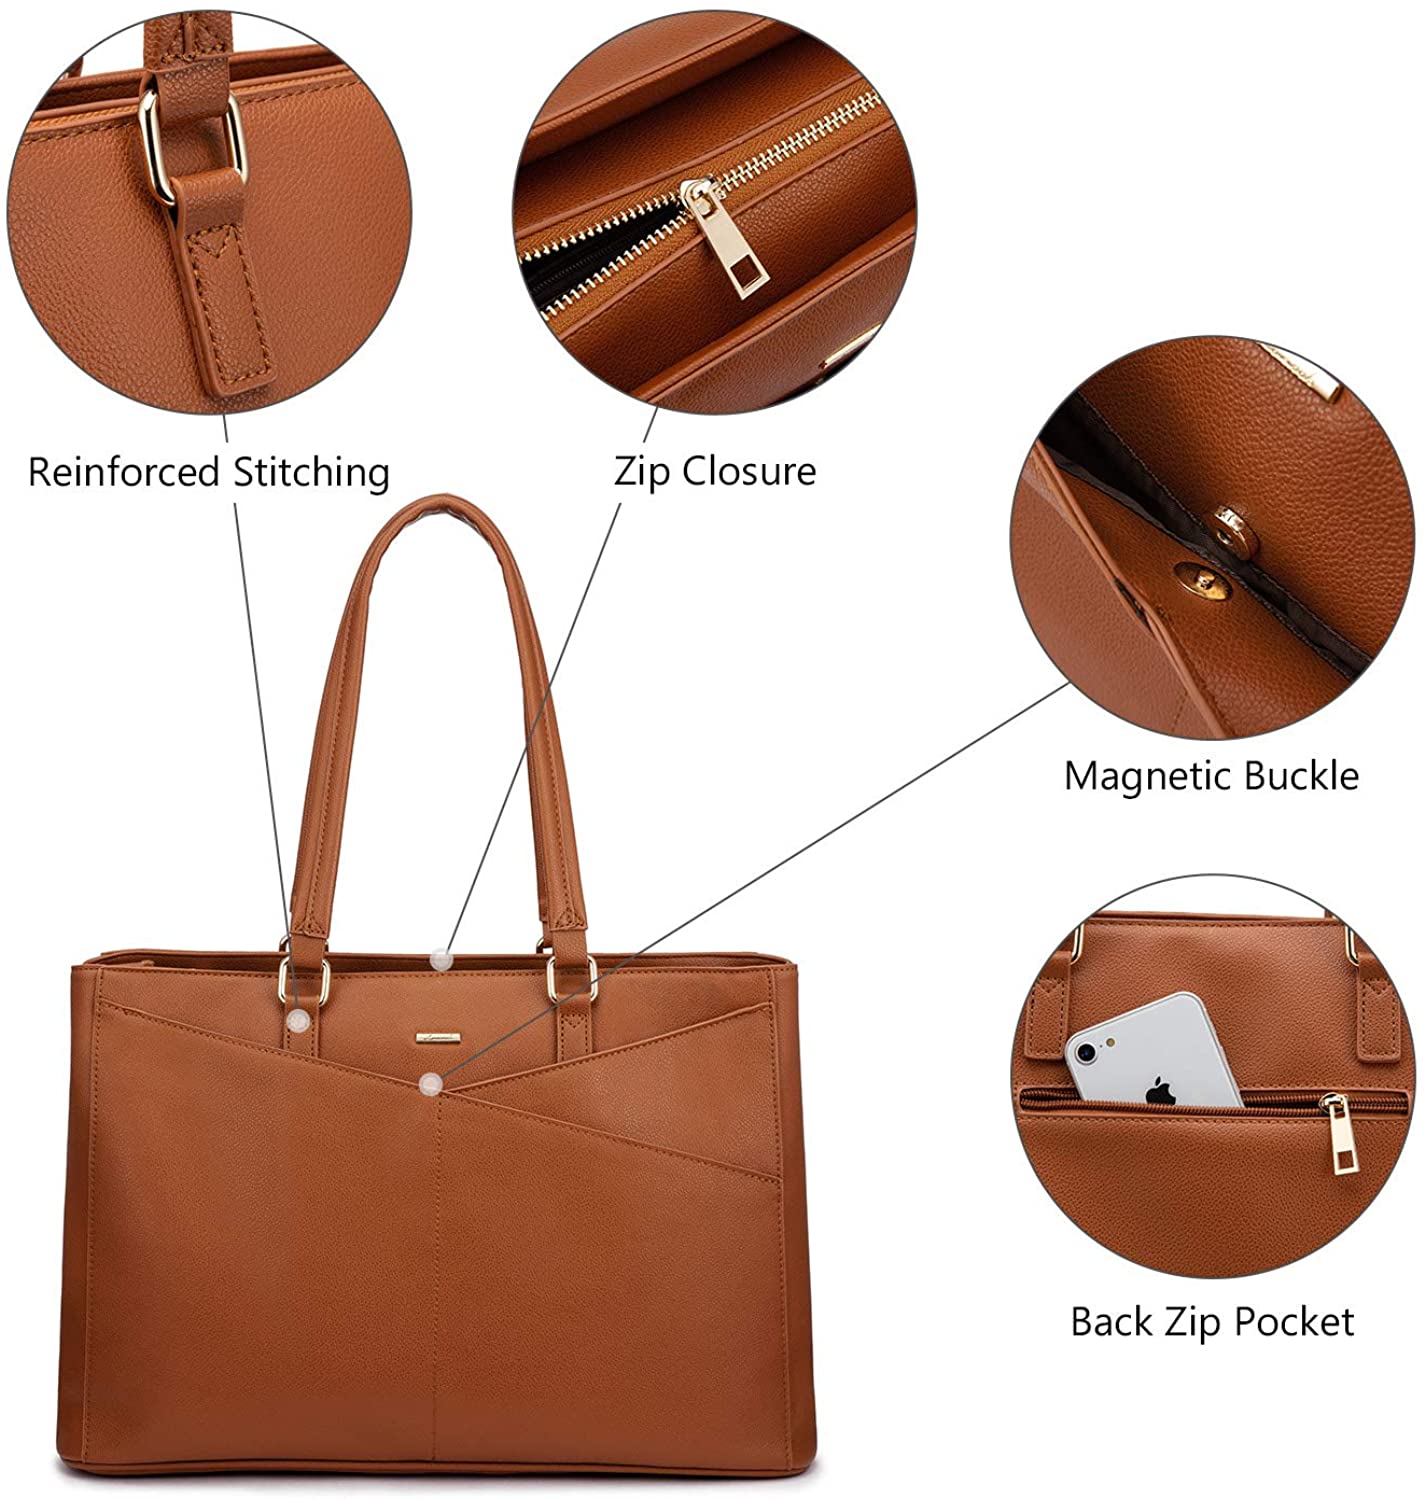 Laptop Tote Bag for Women 15.6 Inch Waterproof Leather Computer Bags Women Business Office Work Bag Briefcase